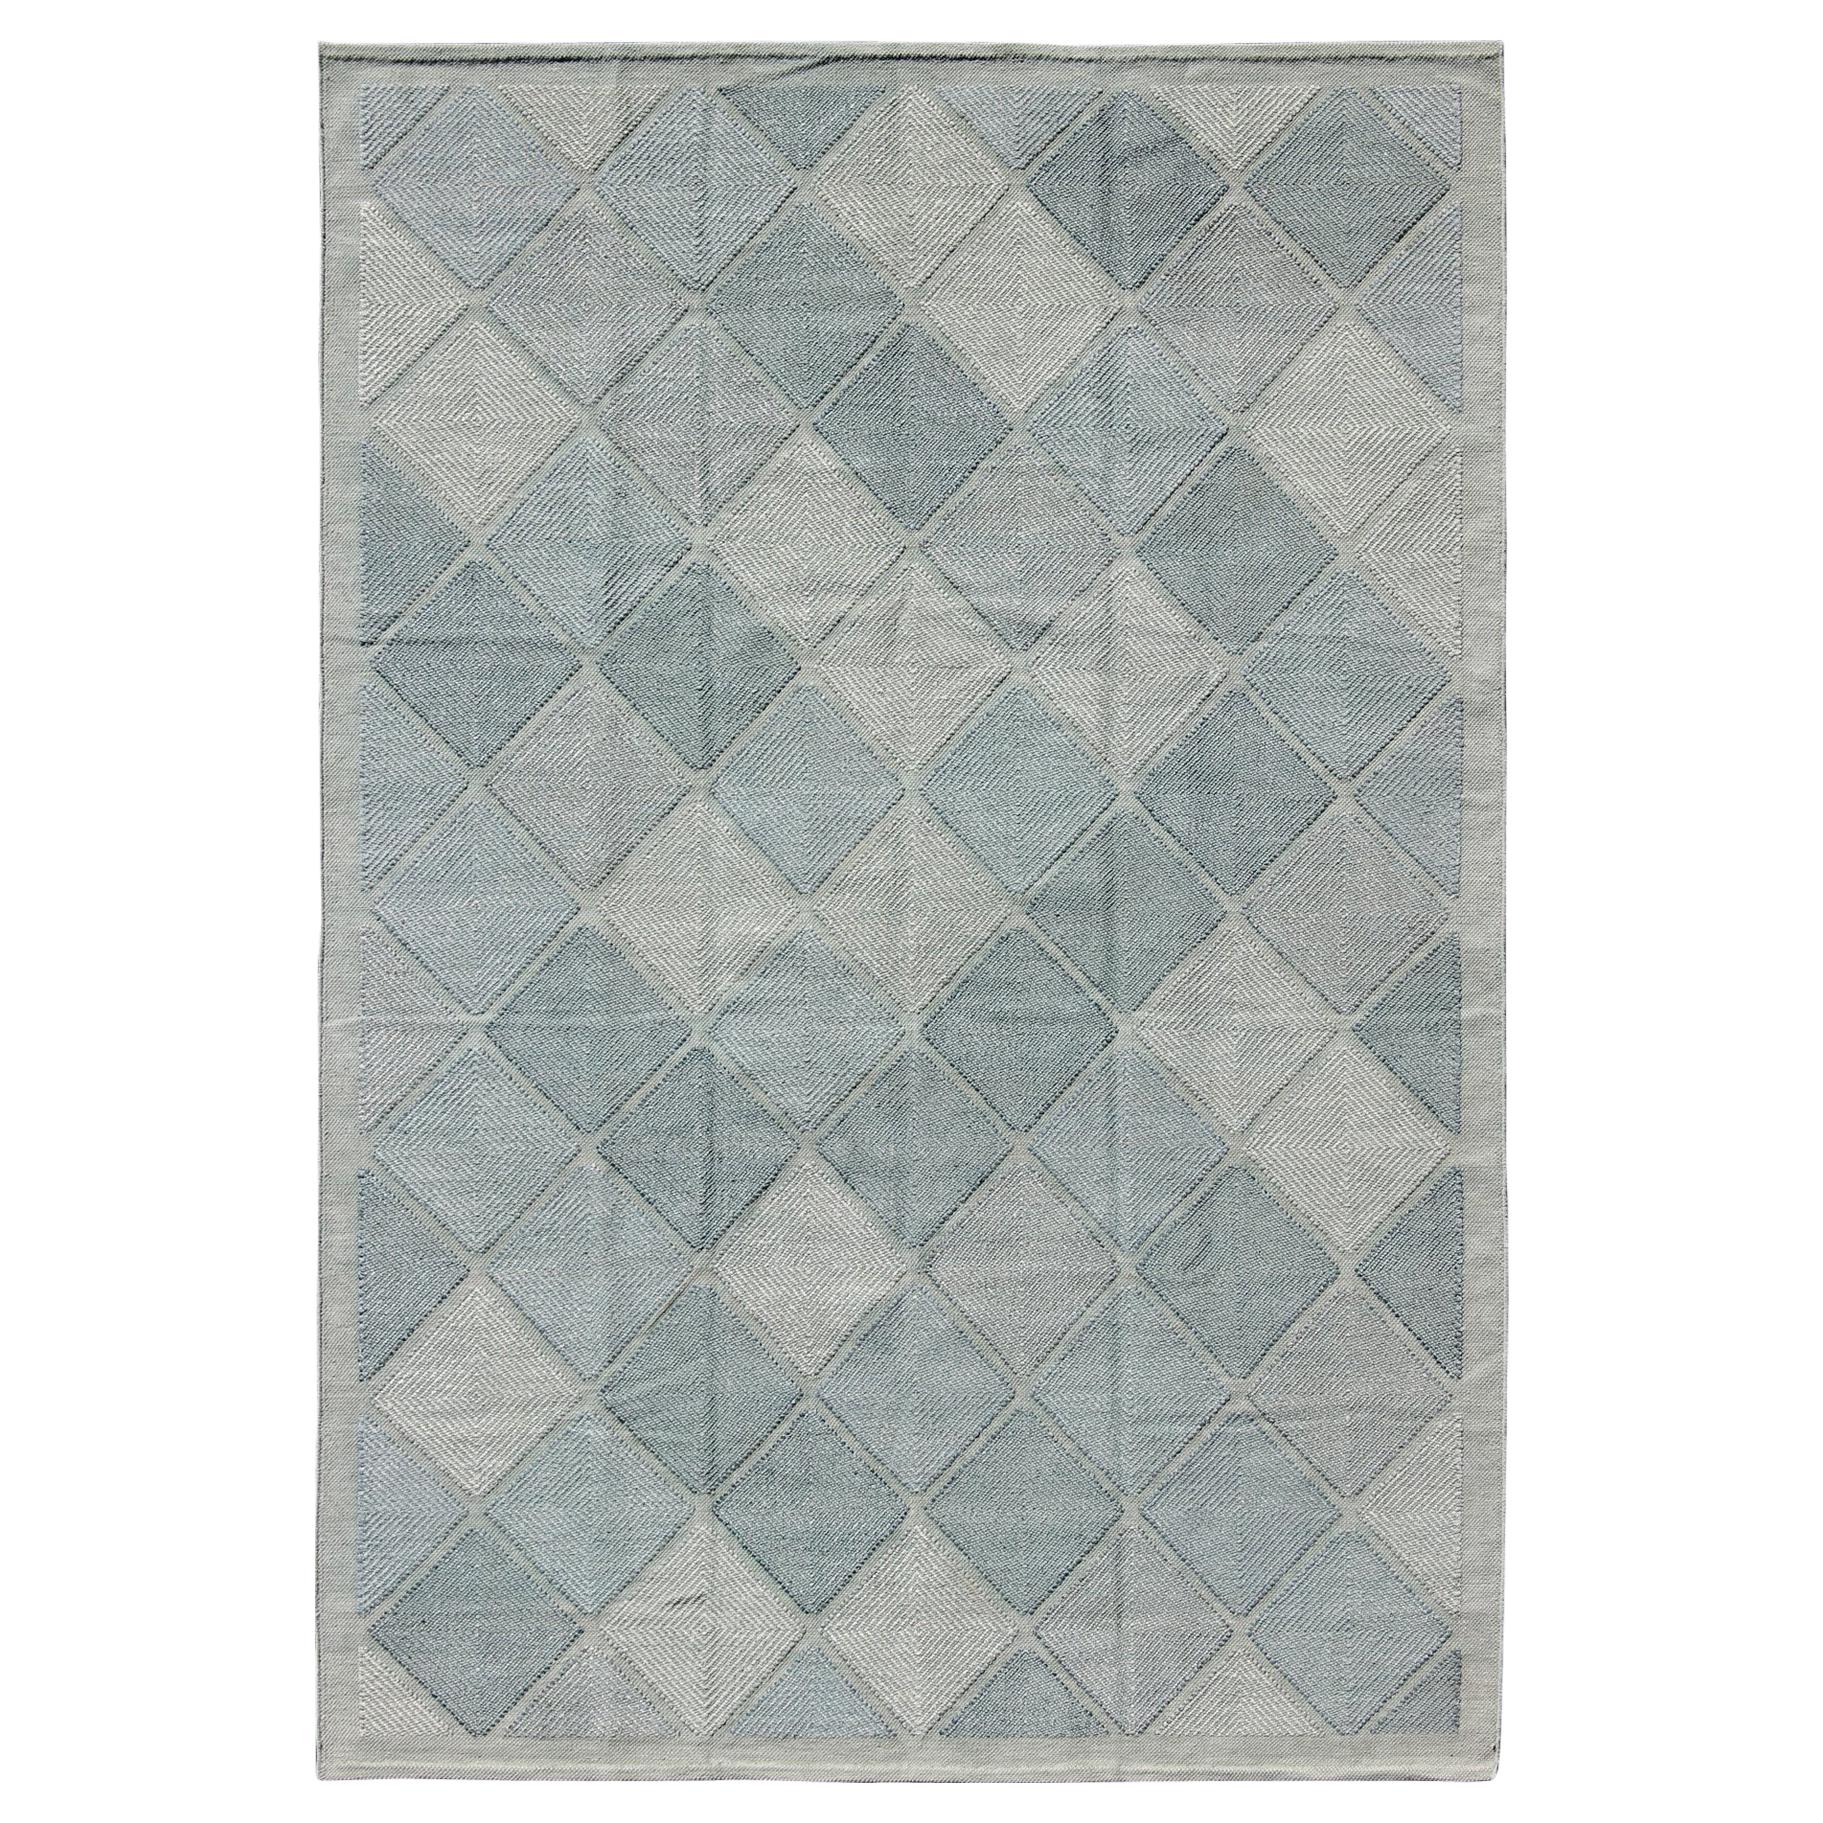 Large Scandinavian Inspired Design Rug in Blue, Tan and Gray Colors For Sale